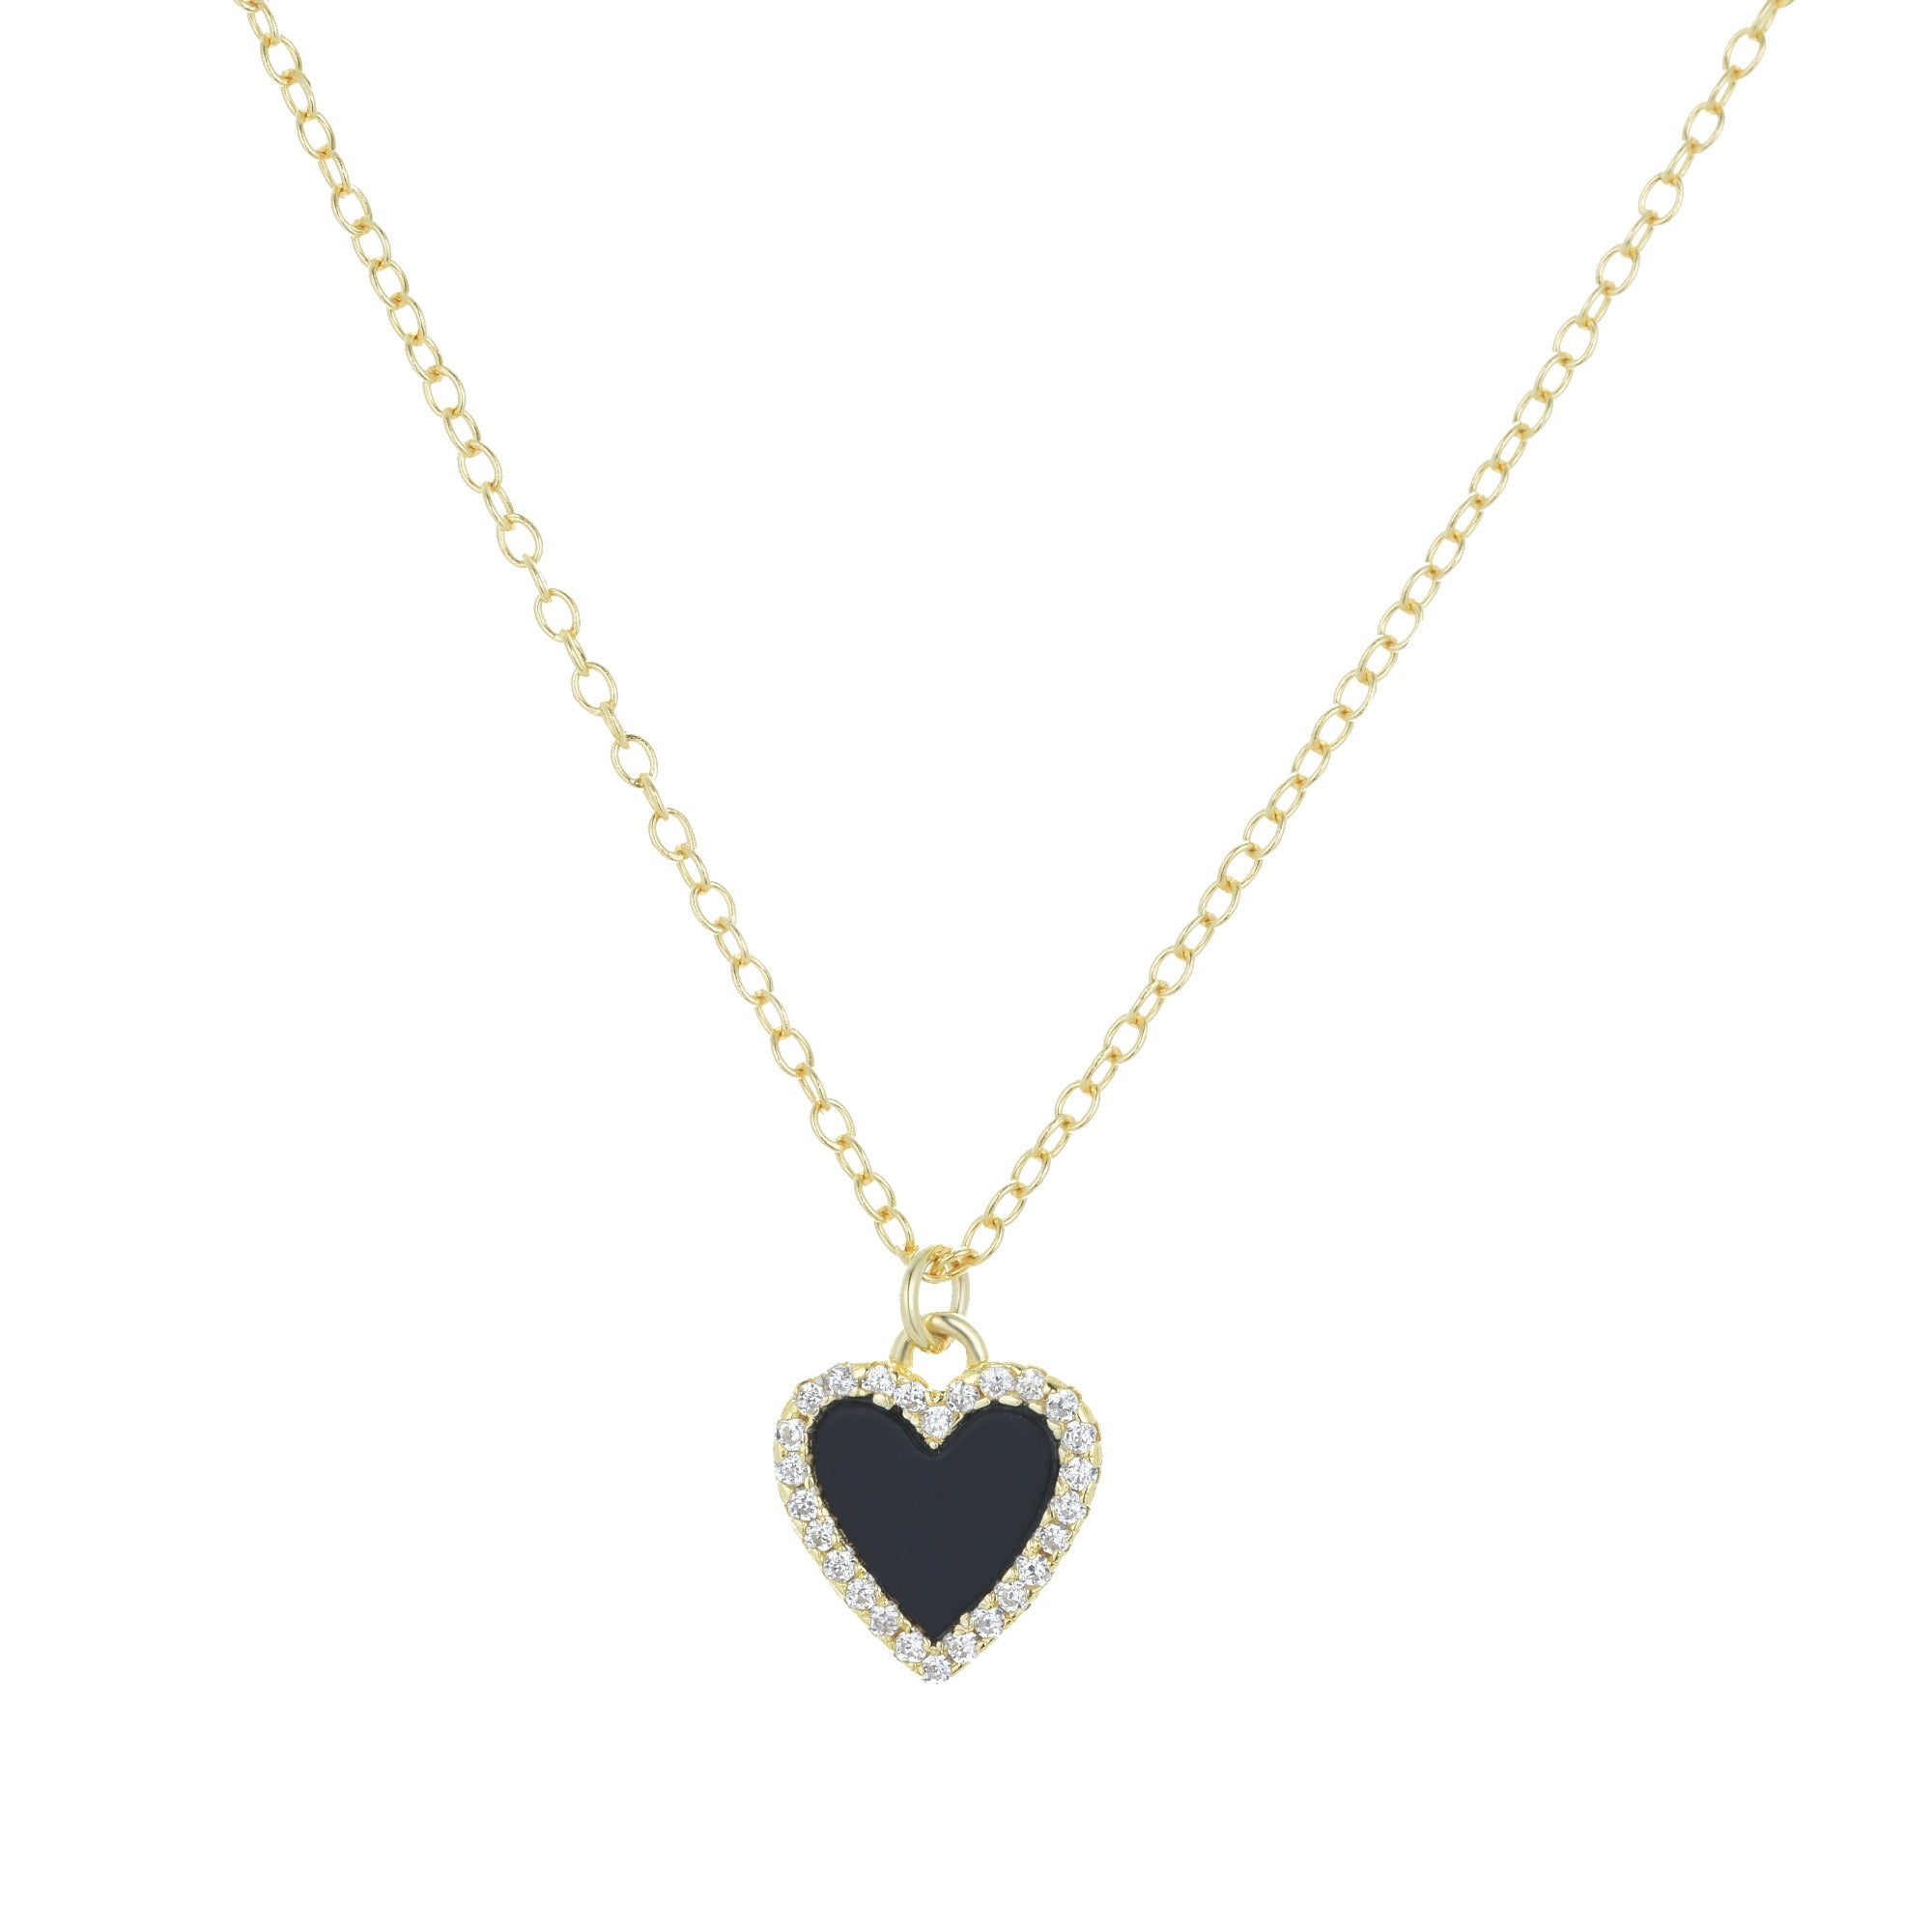 Mini Black Onyx Heart Necklace With Crystals